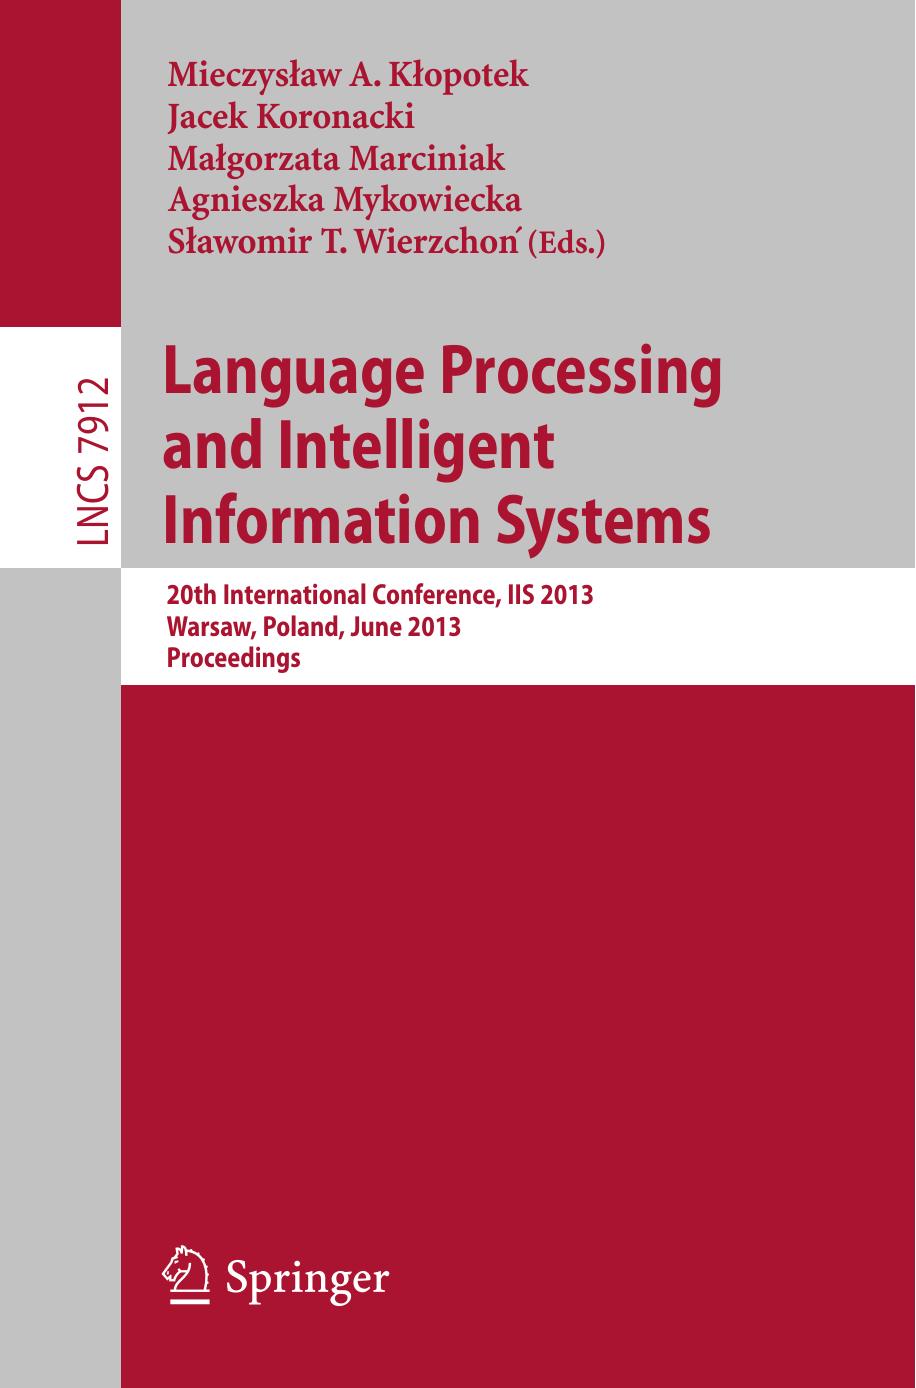 Language Processing and Intelligent Information Systems: 20th International Conference, IIS 2013, Warsaw, Poland, June 17-18, 2013, Proceedings